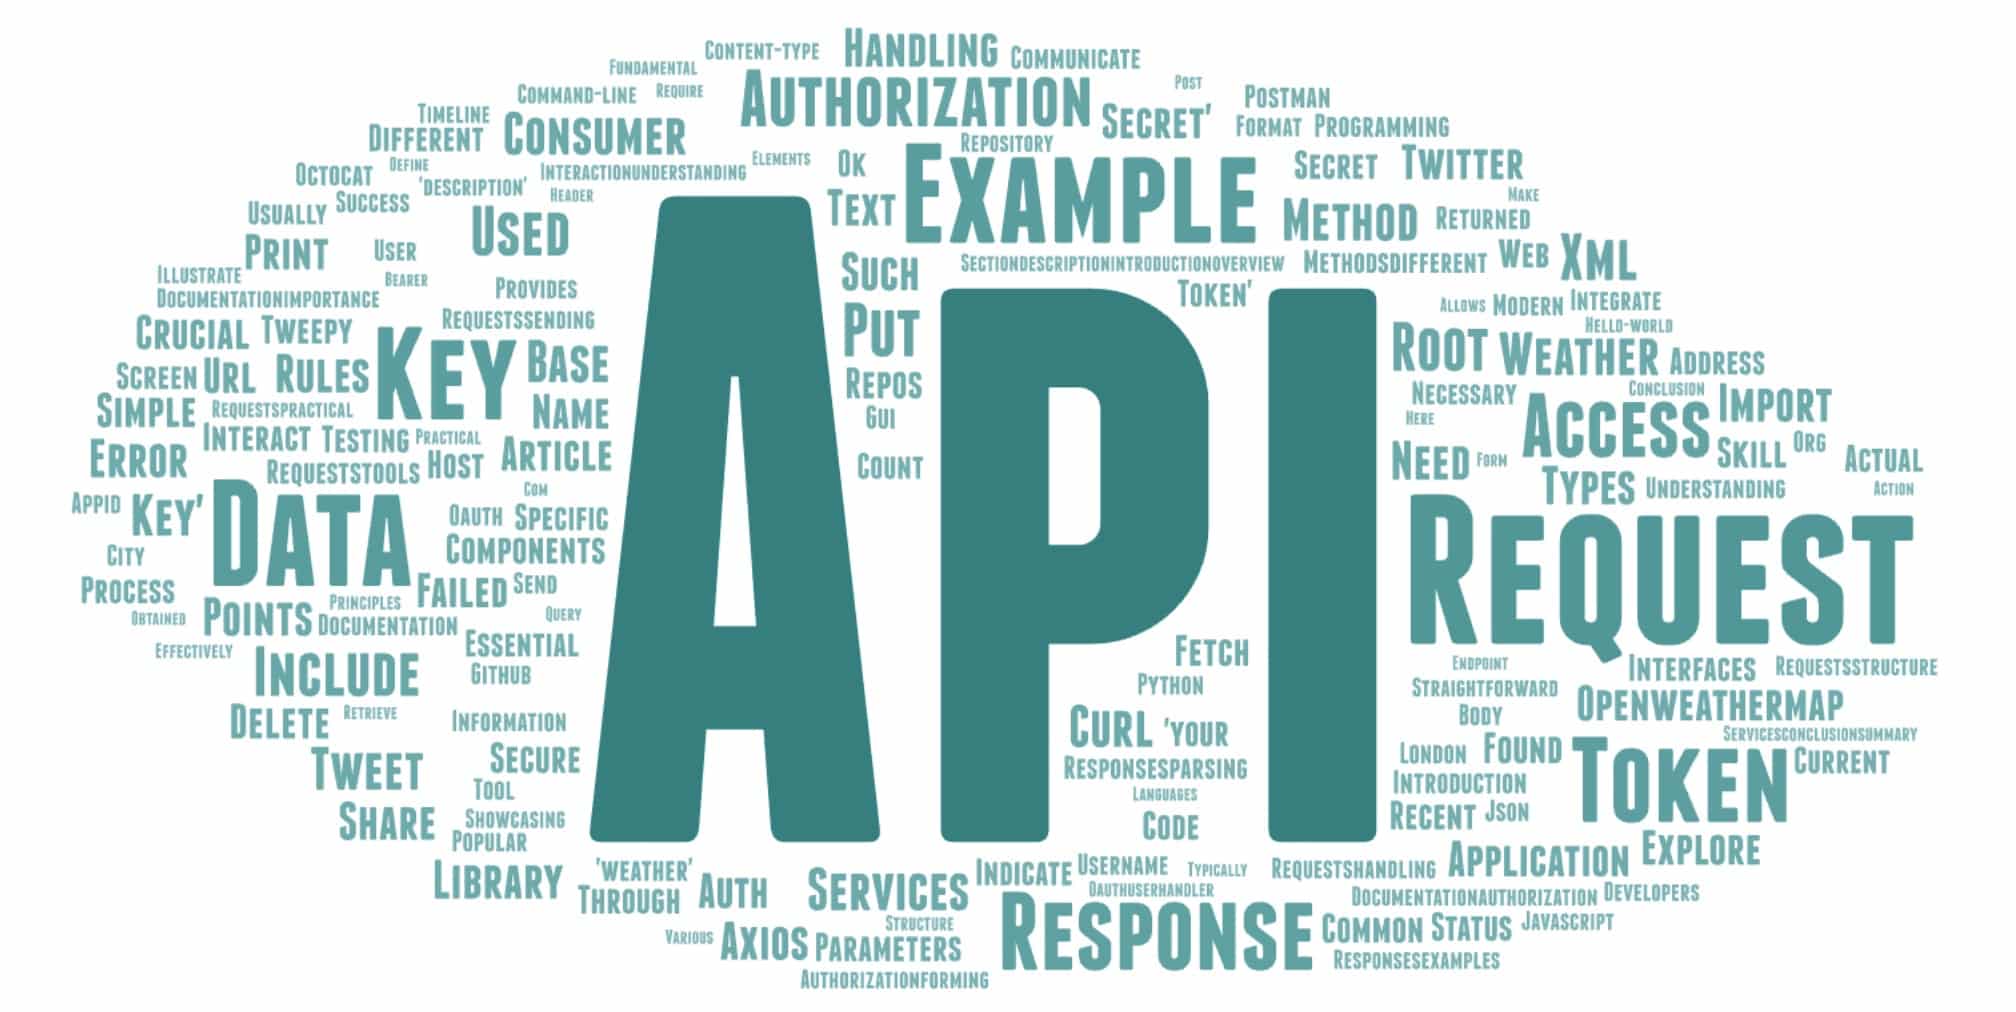 How to Interact with Web Services Through the API?